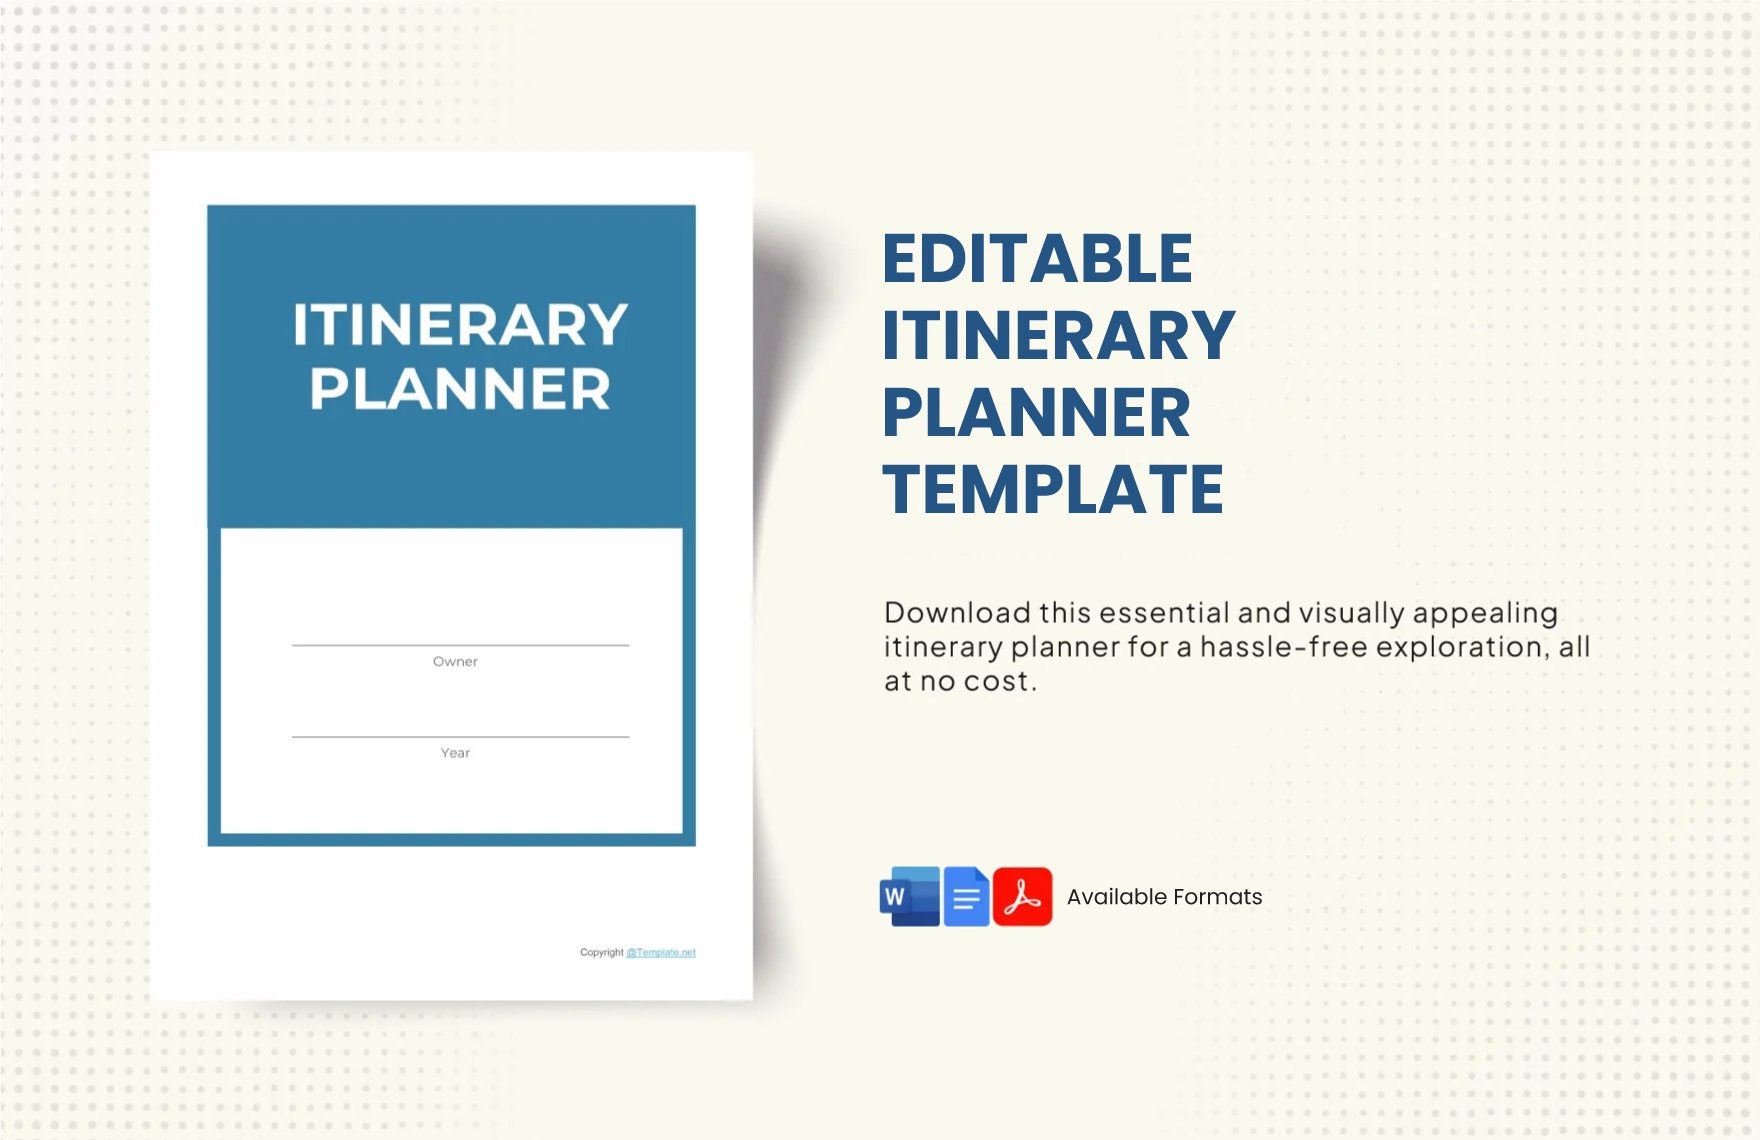 Free Editable Itinerary Planner Template in Word, Google Docs, PDF, Apple Pages